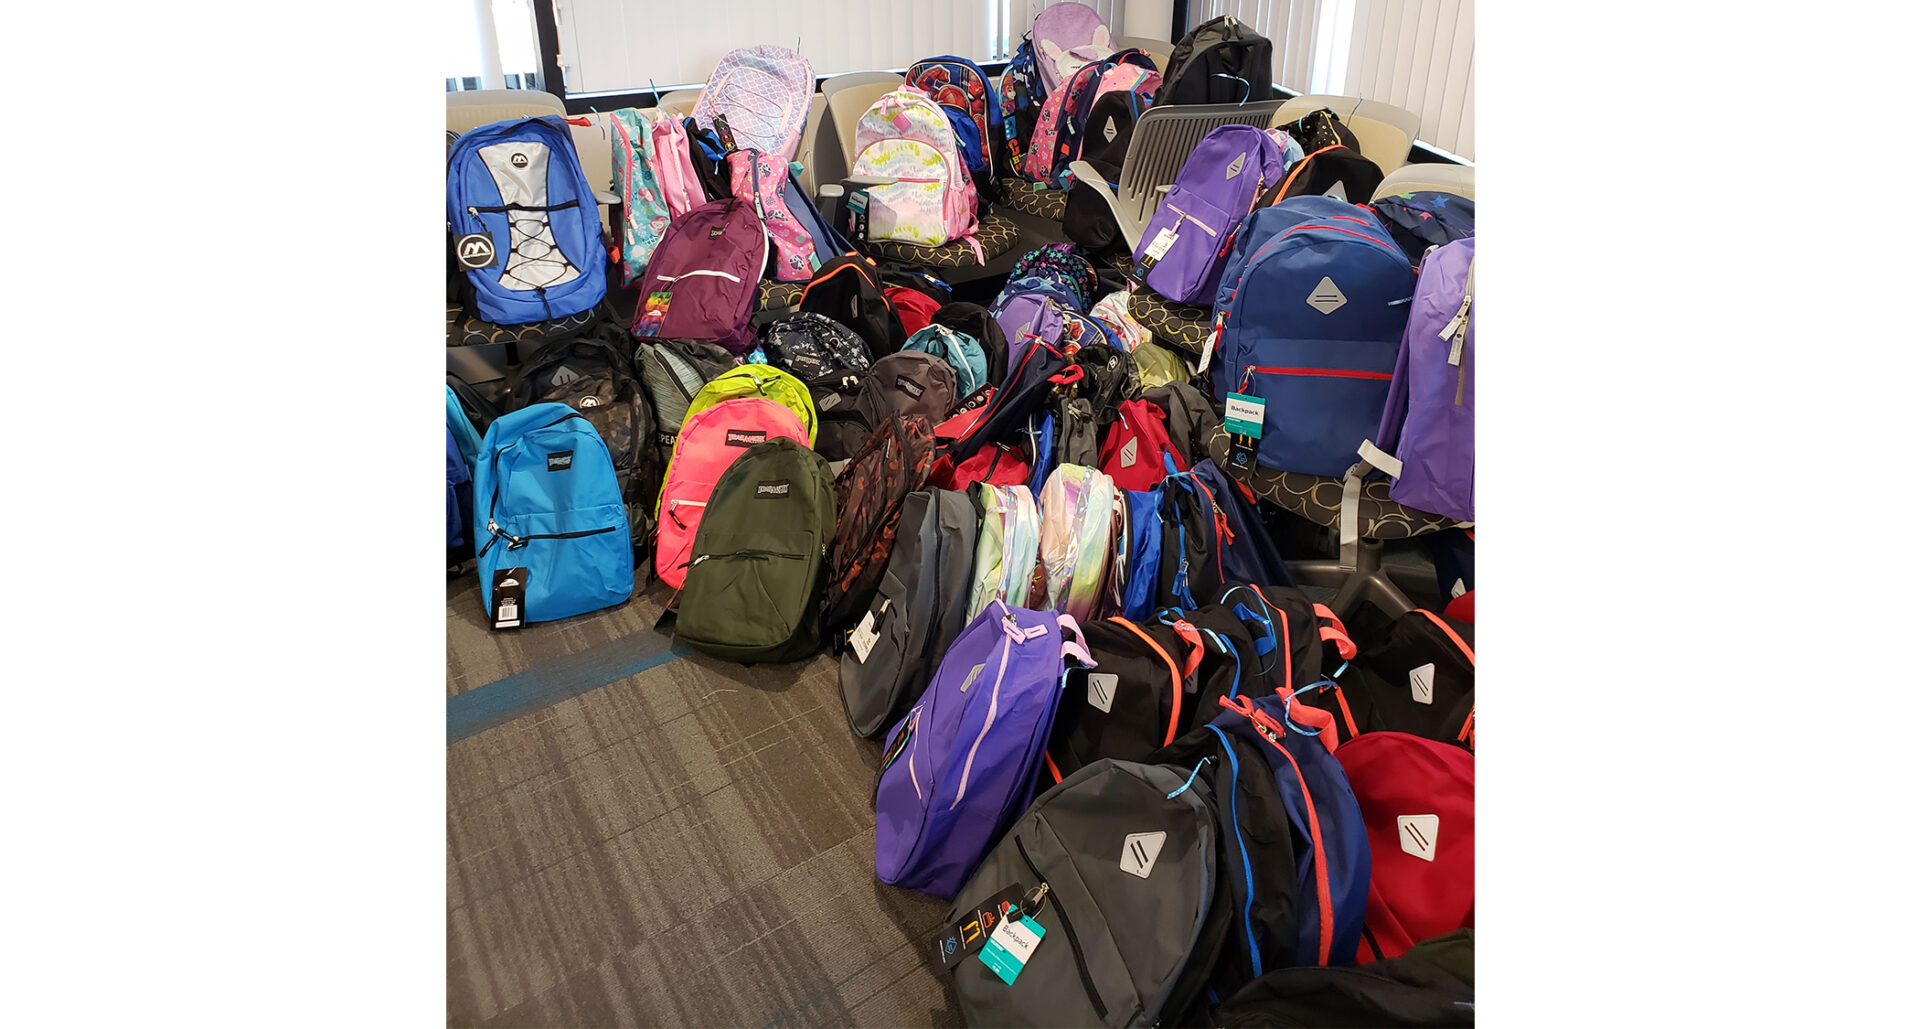 backpacks setup in a room on the floor